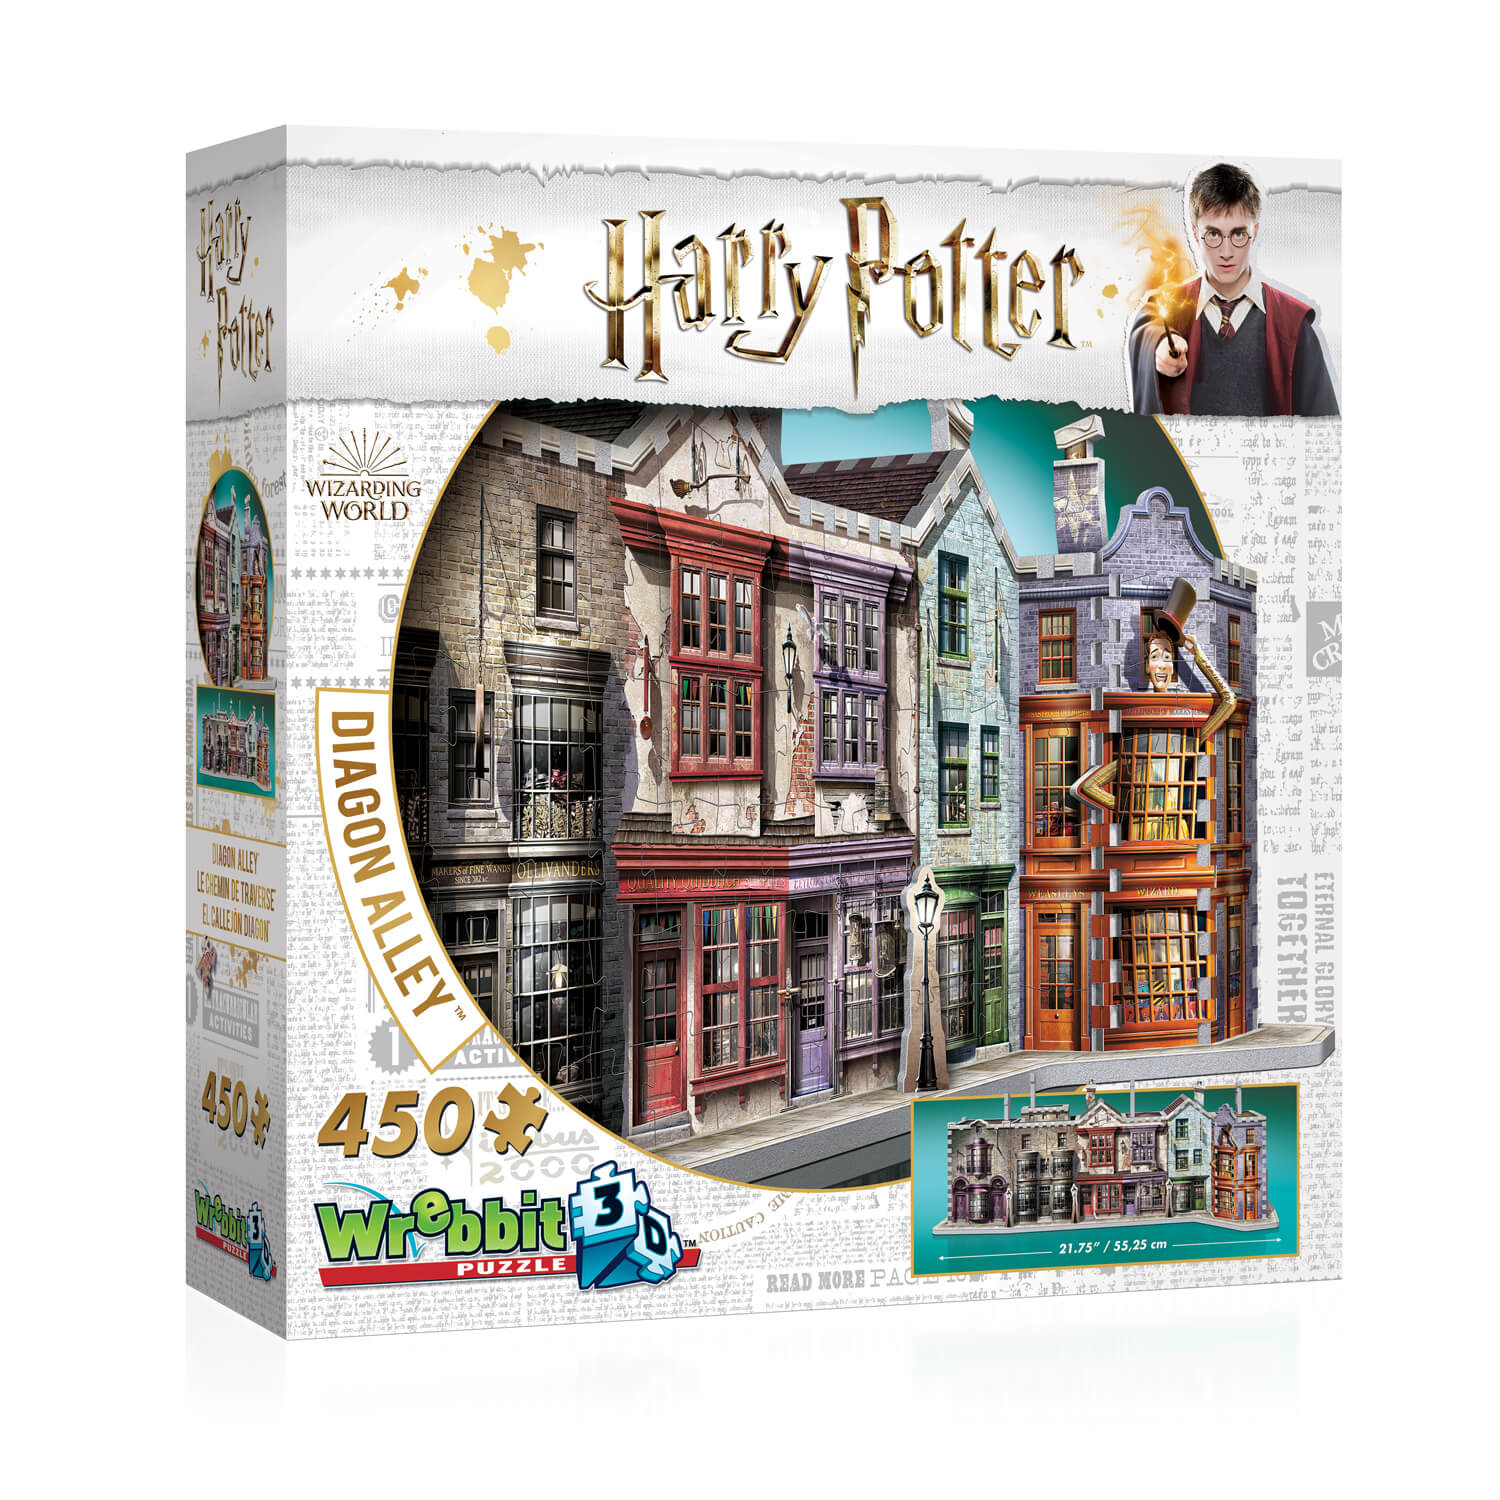 Harry Potter Puzzle - Dementors at Hogwarts (1000 pieces), 29.90 CHF